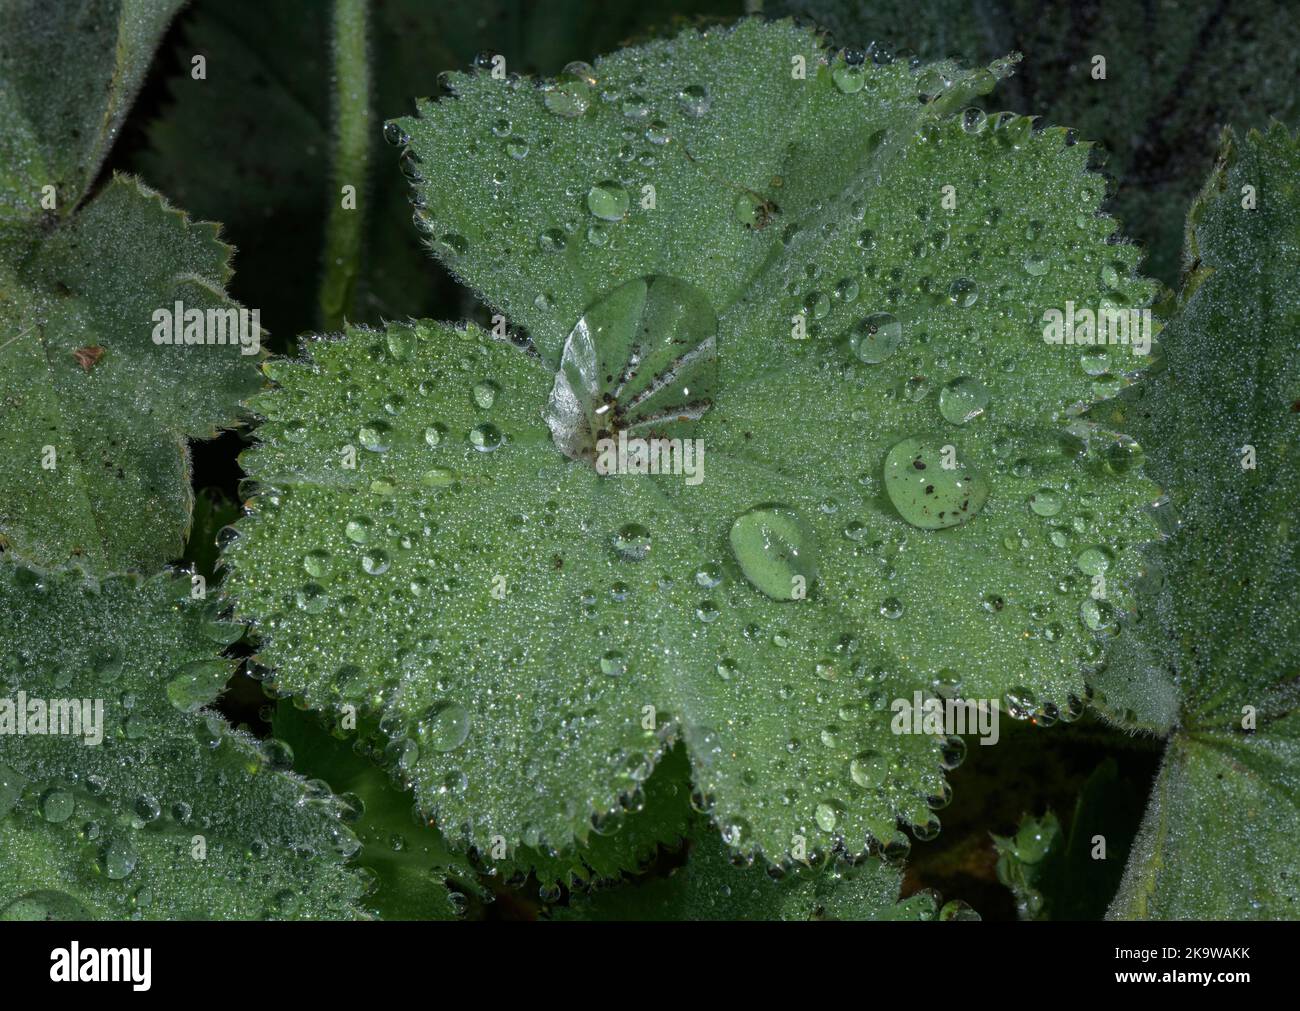 Lady's Mantle, Alchemilla, leaves with raindrops. Stock Photo